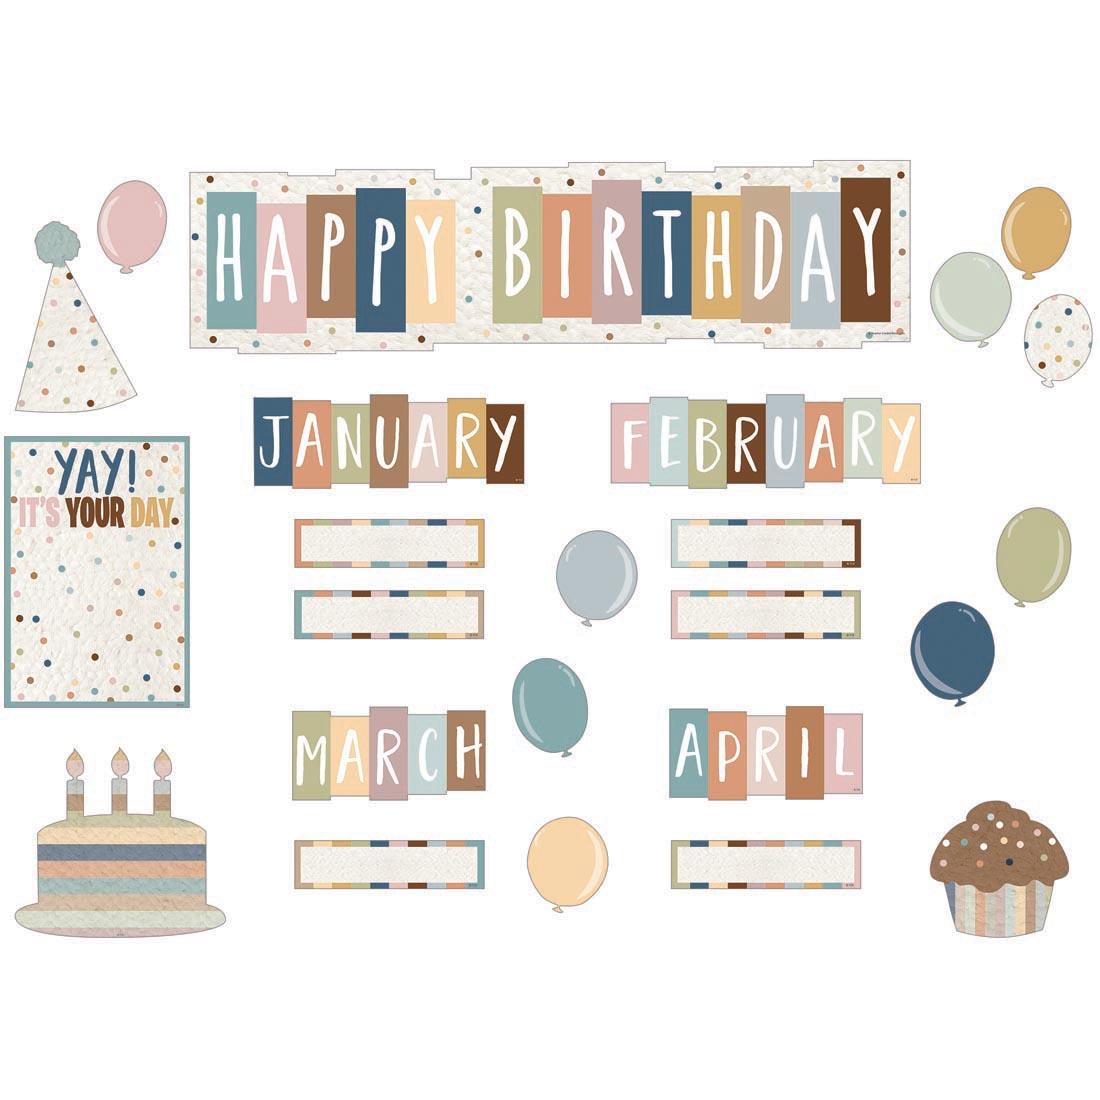 Happy Birthday Mini Bulletin Board Set from the Everyone is Welcome collection by Teacher Created Resources